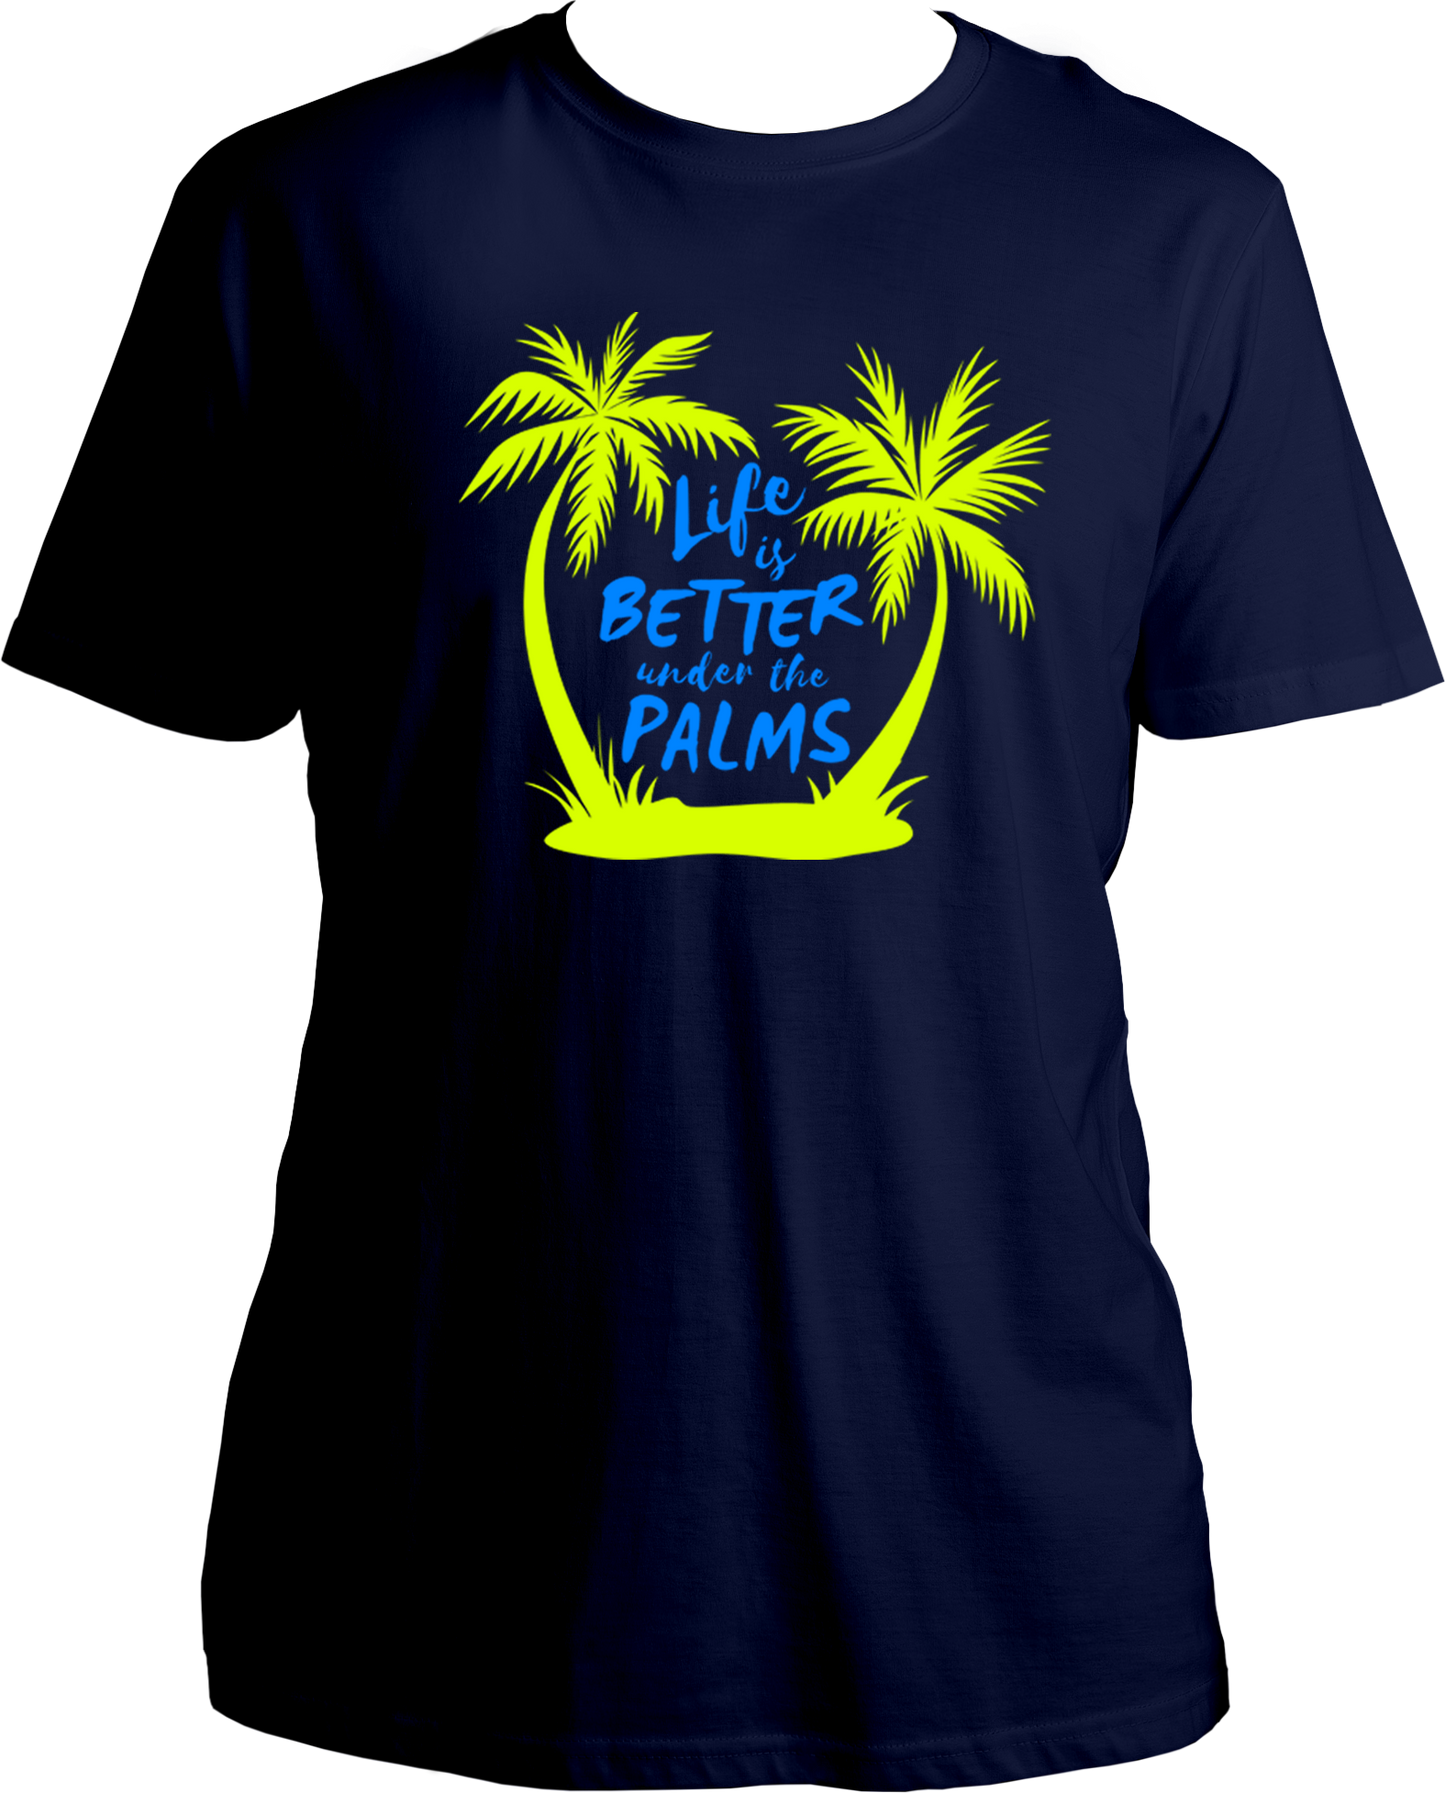 Relax under the palms in this stylish, comfy "Life Is Better Under The Palms" Vacation T-Shirt! Perfect for men, women and kids, this 100% Cotton T-shirt from Garrari is the perfect way to make memories on your next family trip. Make your next beach vacation extra special!